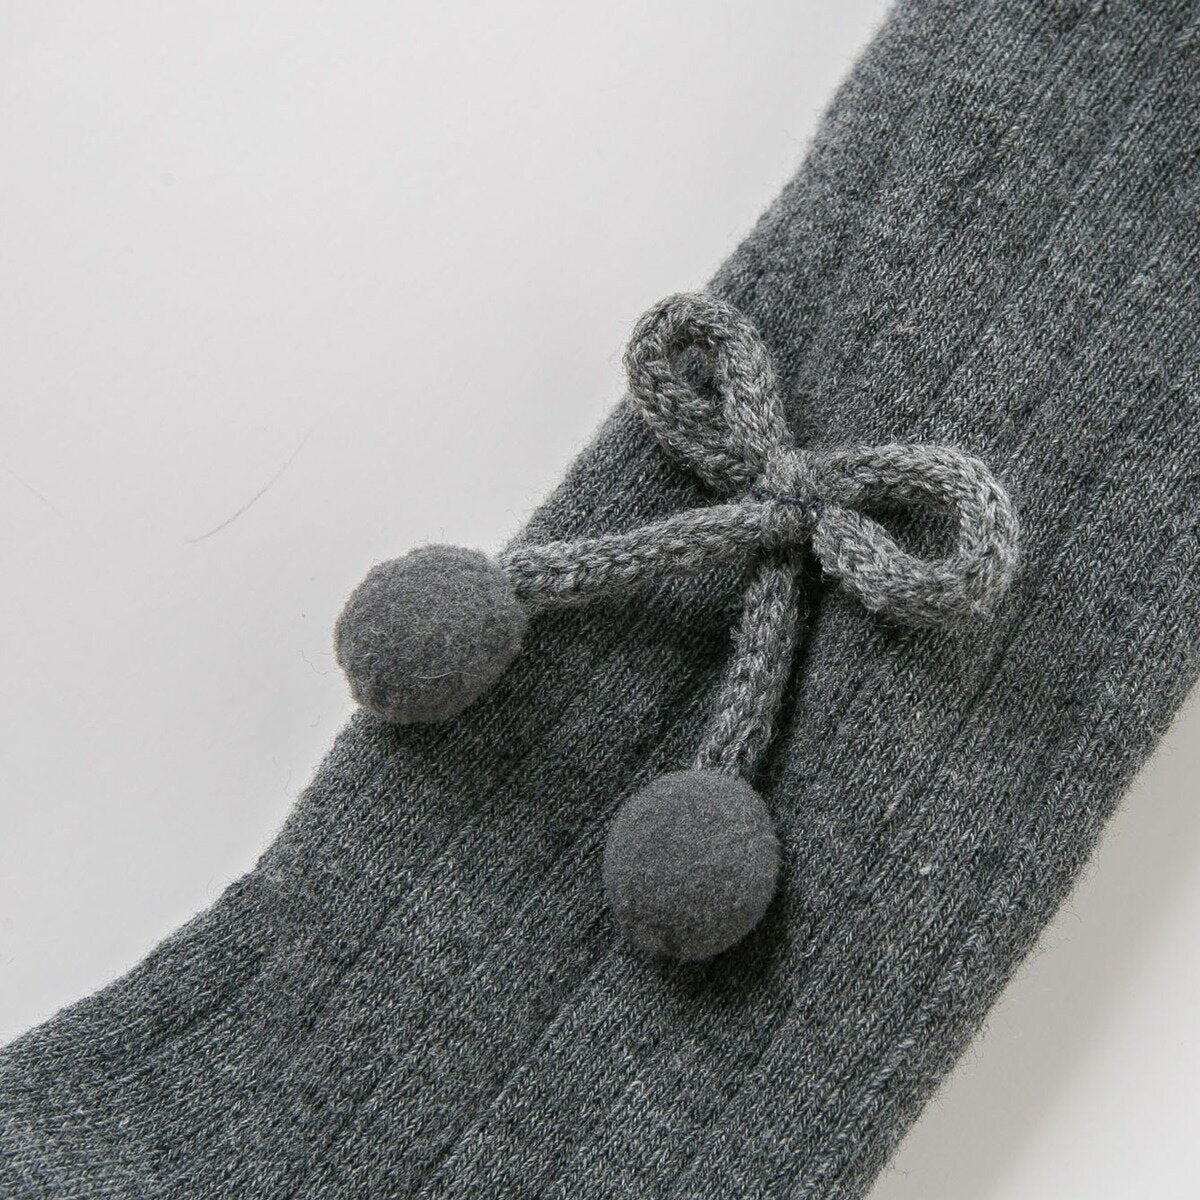 Charcoal Pom Poms Knot Fleece Lined Tights